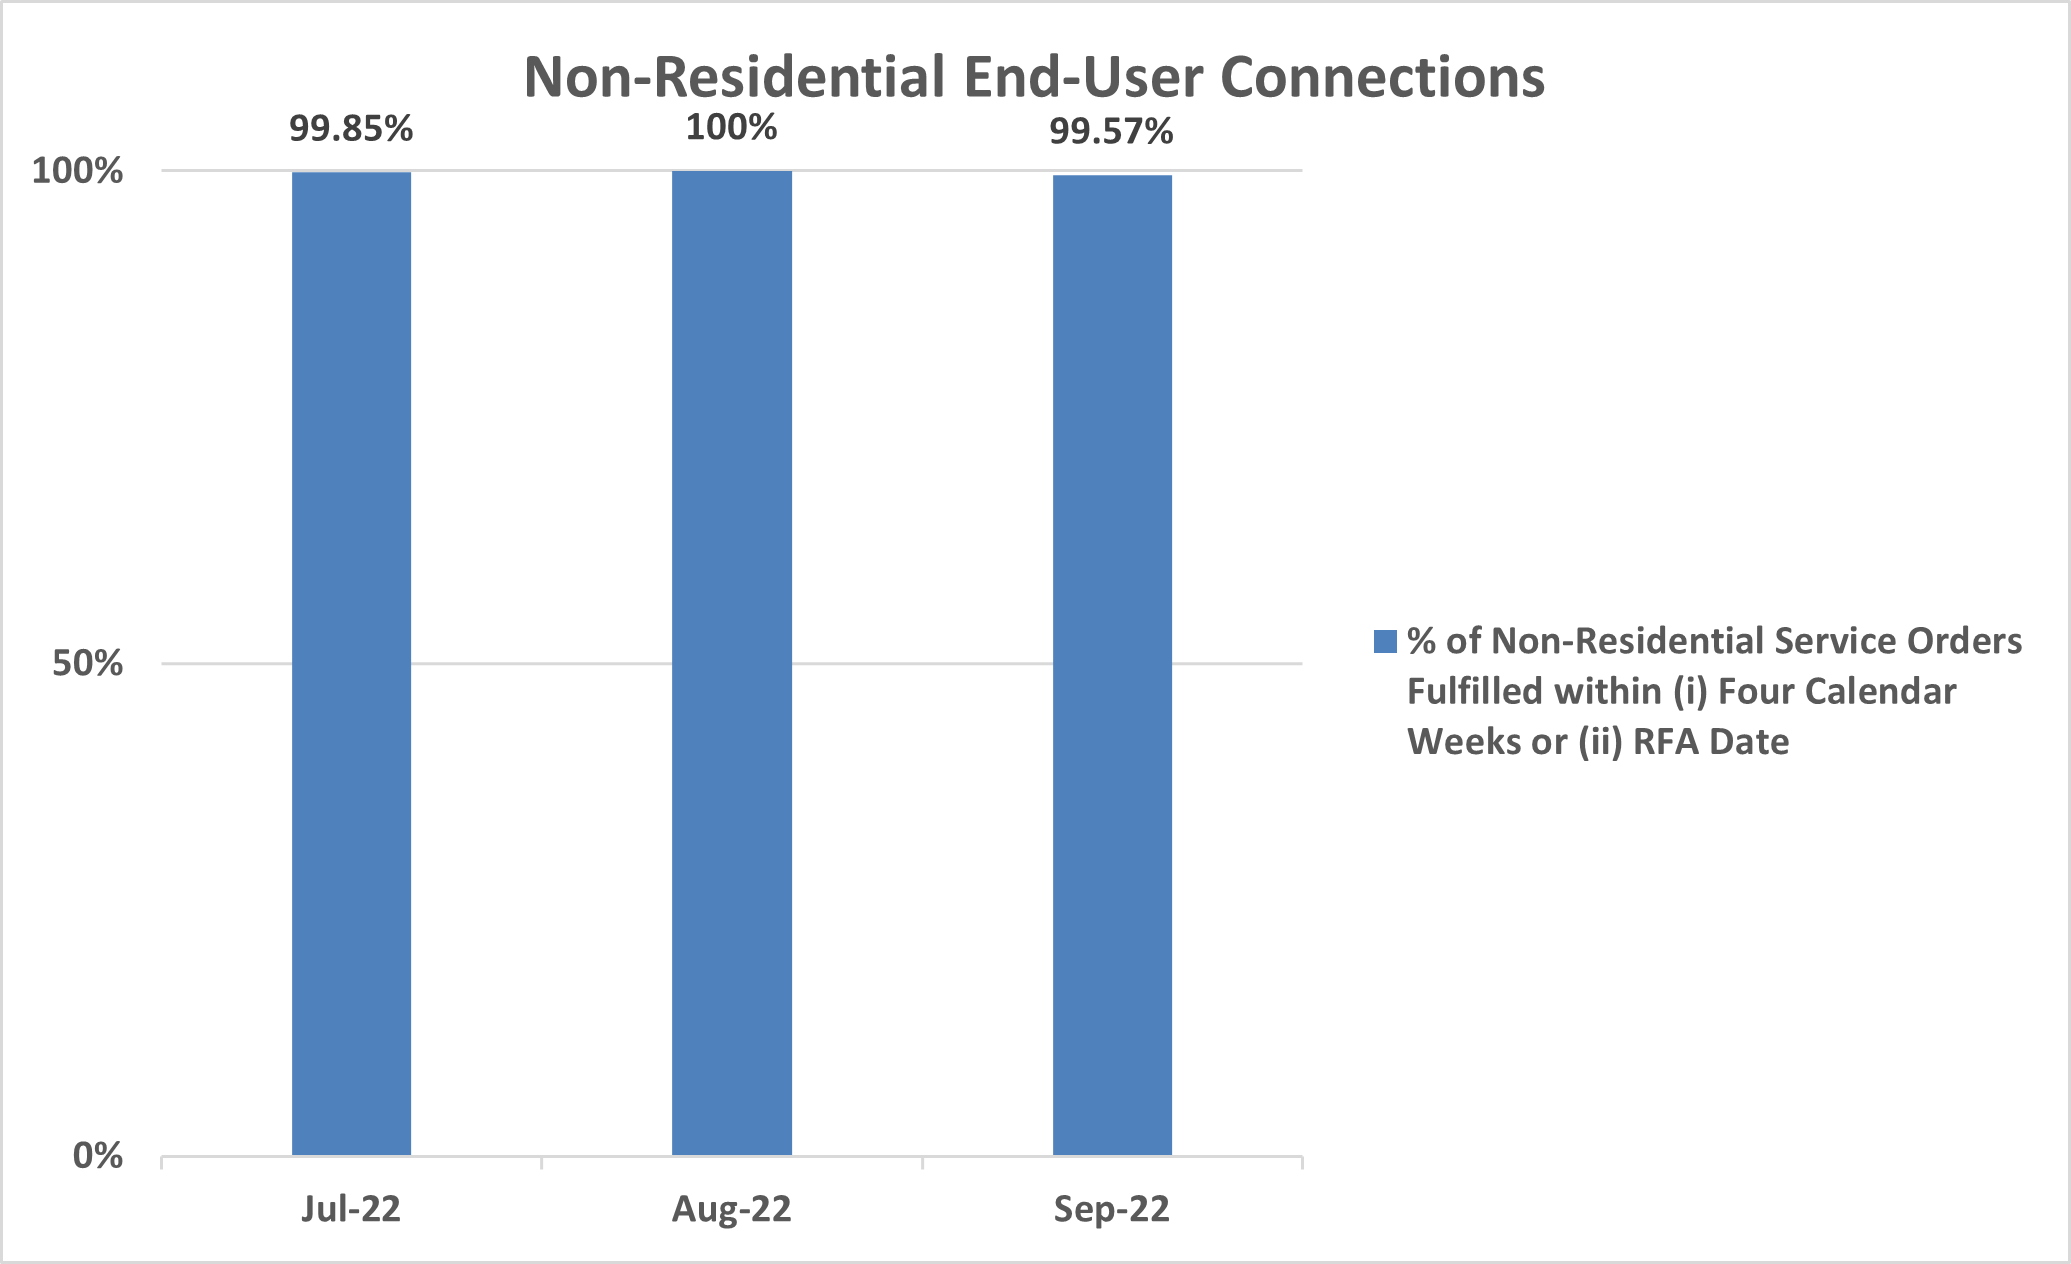 Non-Residential End User Connections